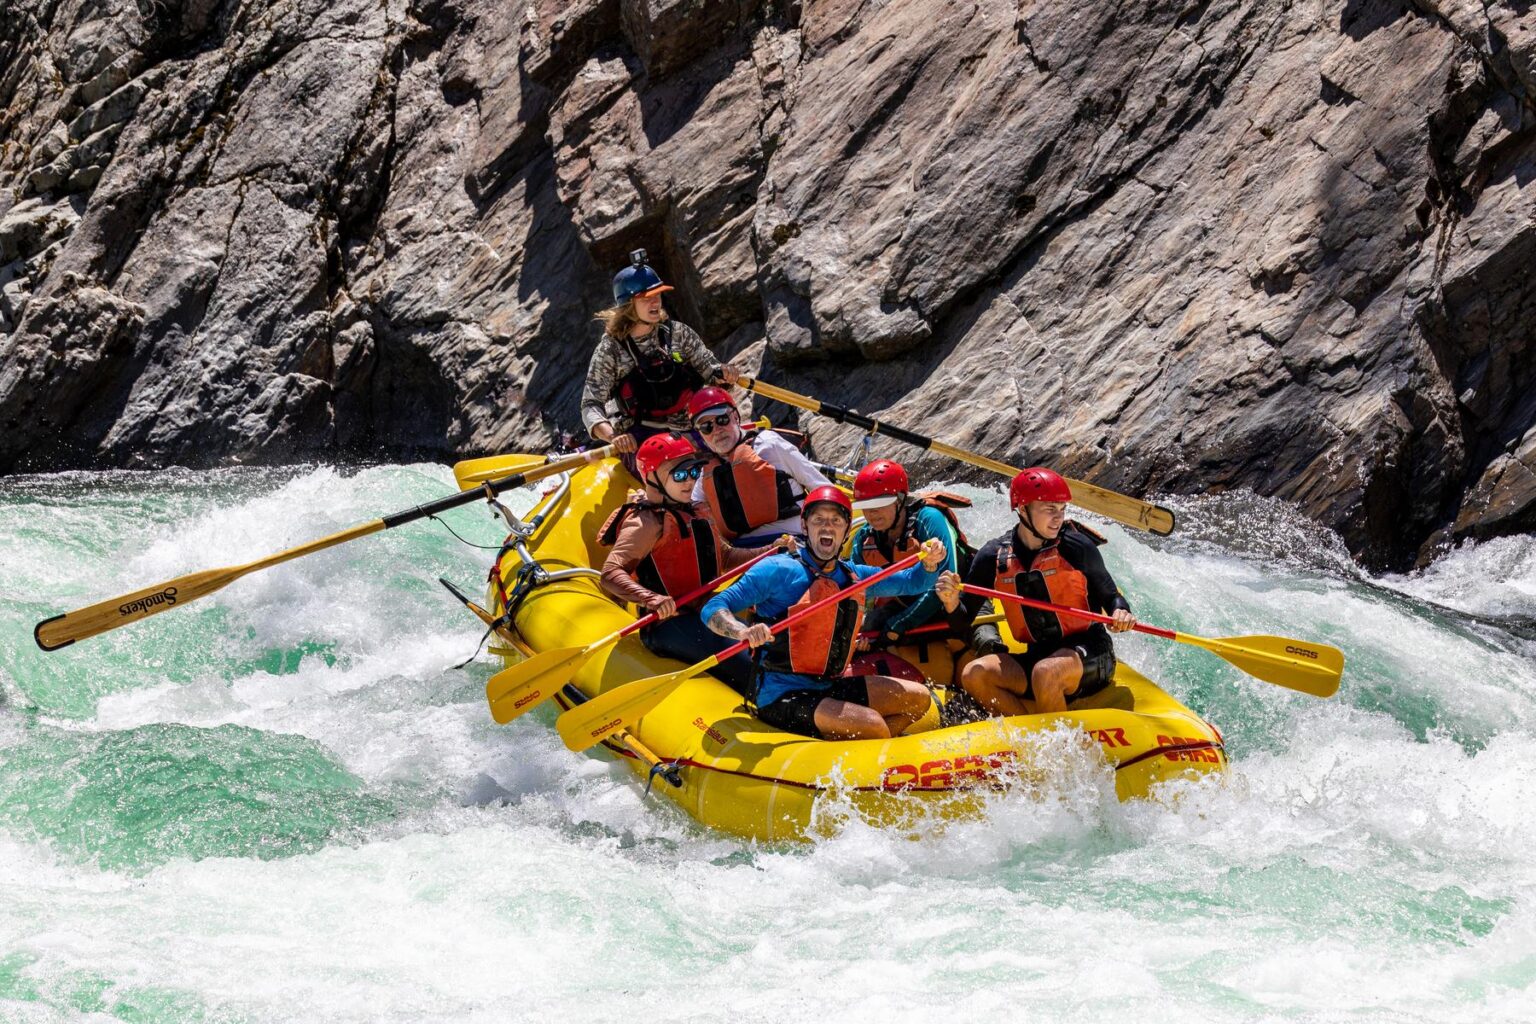 A group of rafters paddling through a rapid on the Tuolumne River.